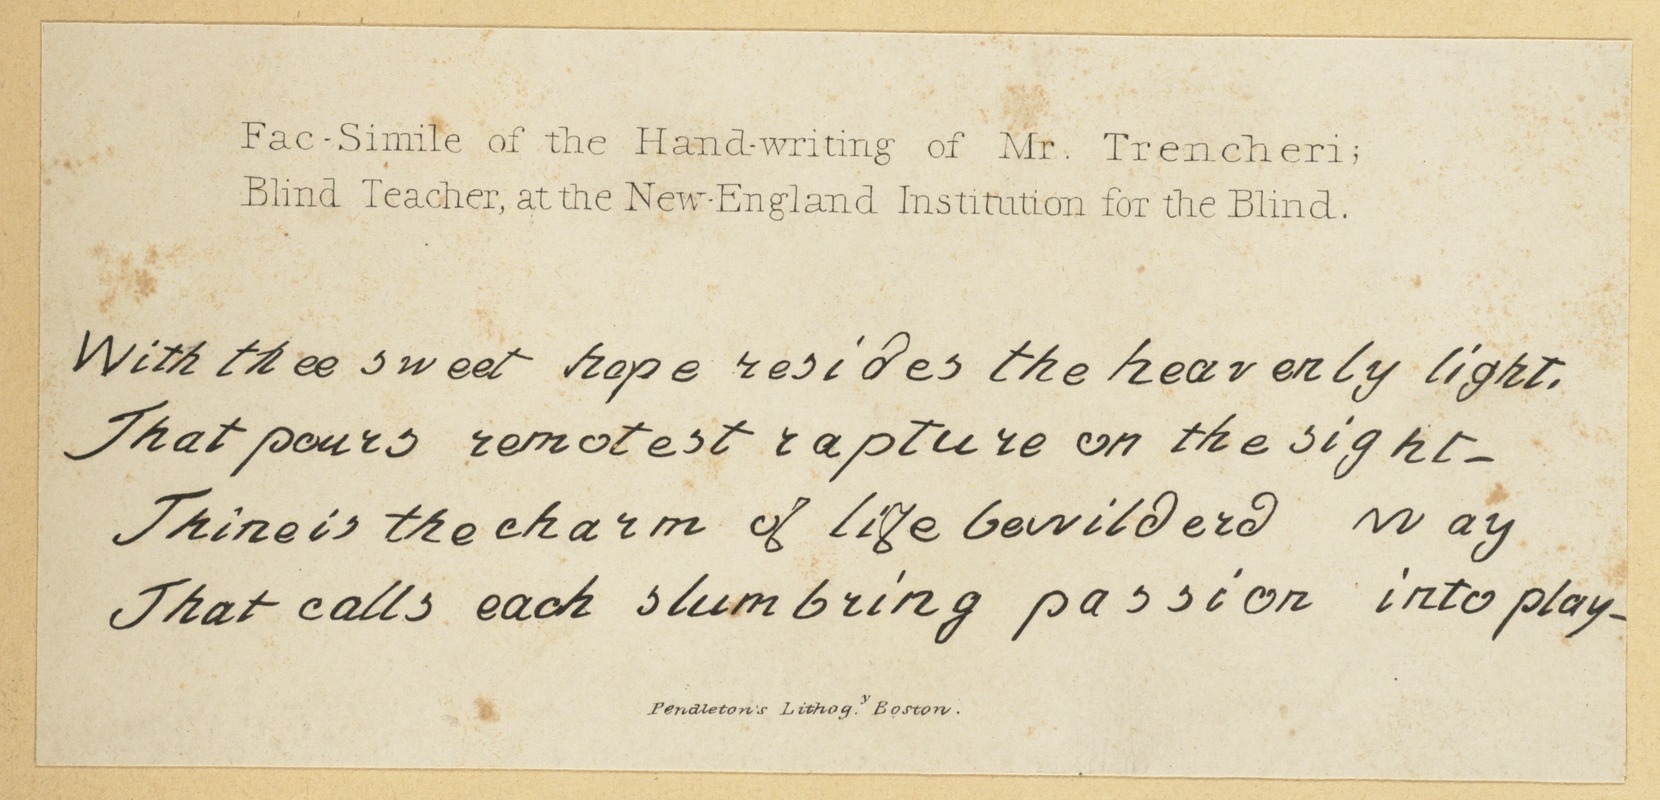 Fac-Simile of the Hand-writing of Mr. Trencheri; Blind Teacher, at the New England Institution for the Blind